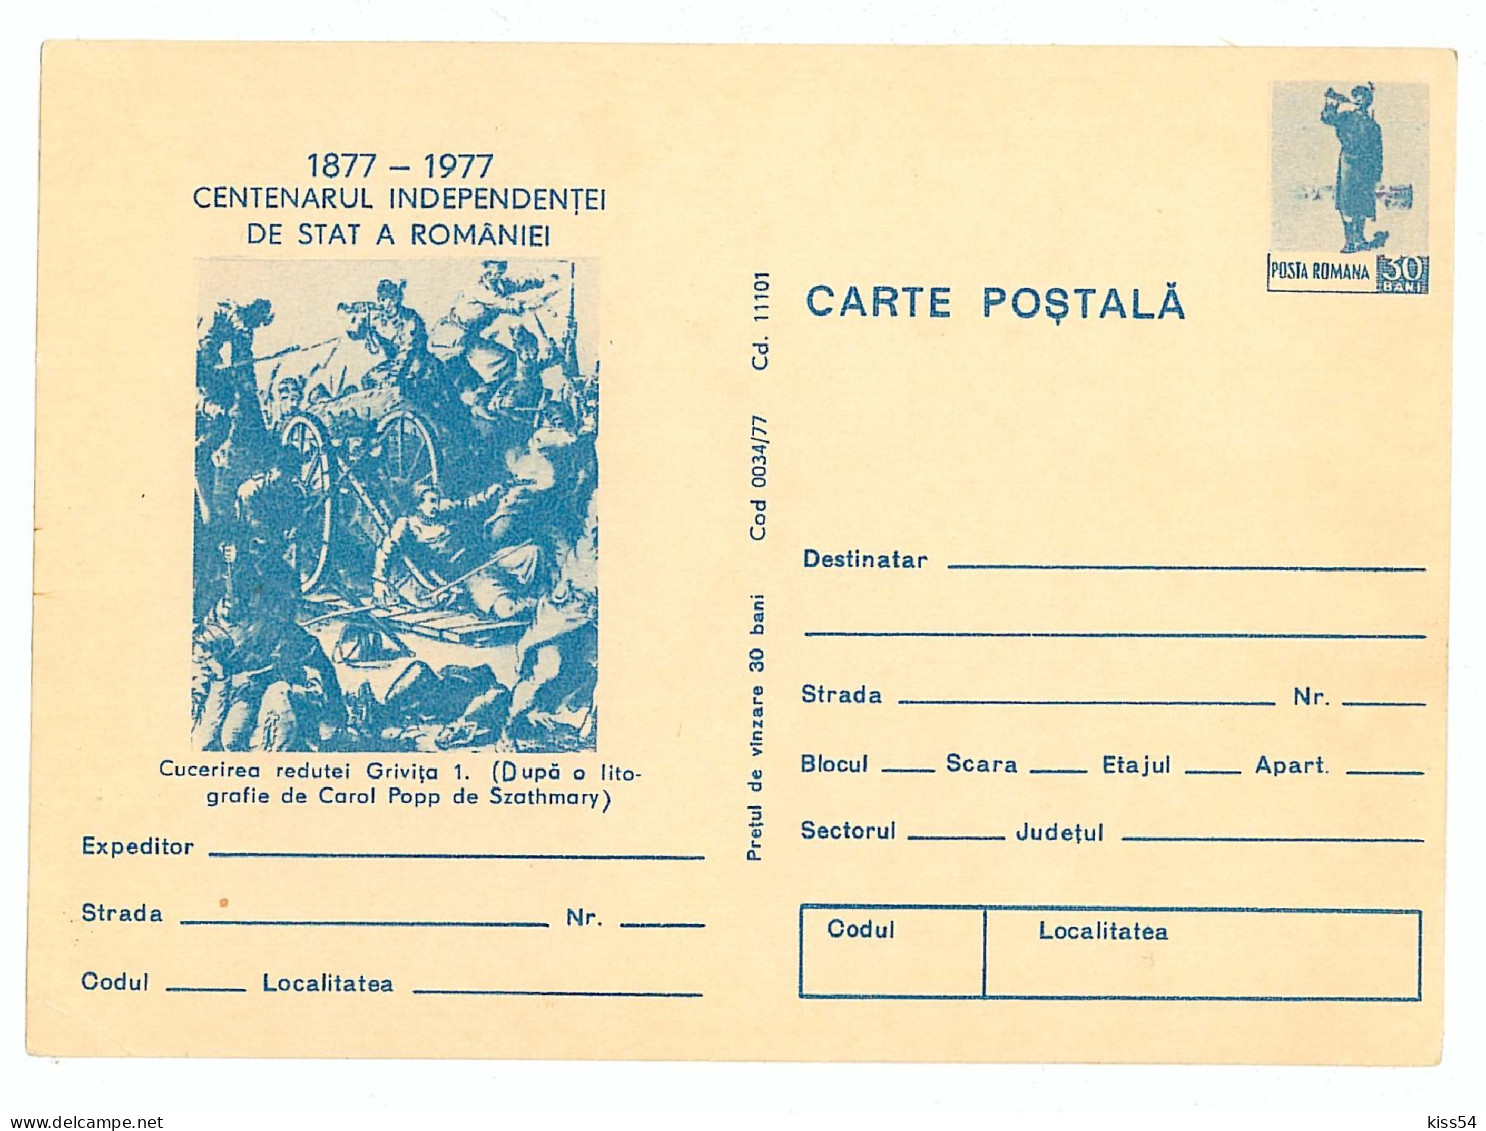 IP 77 A - 34 Centenary Independence Of Romania - Stationery - Unused - 1977 - Postal Stationery